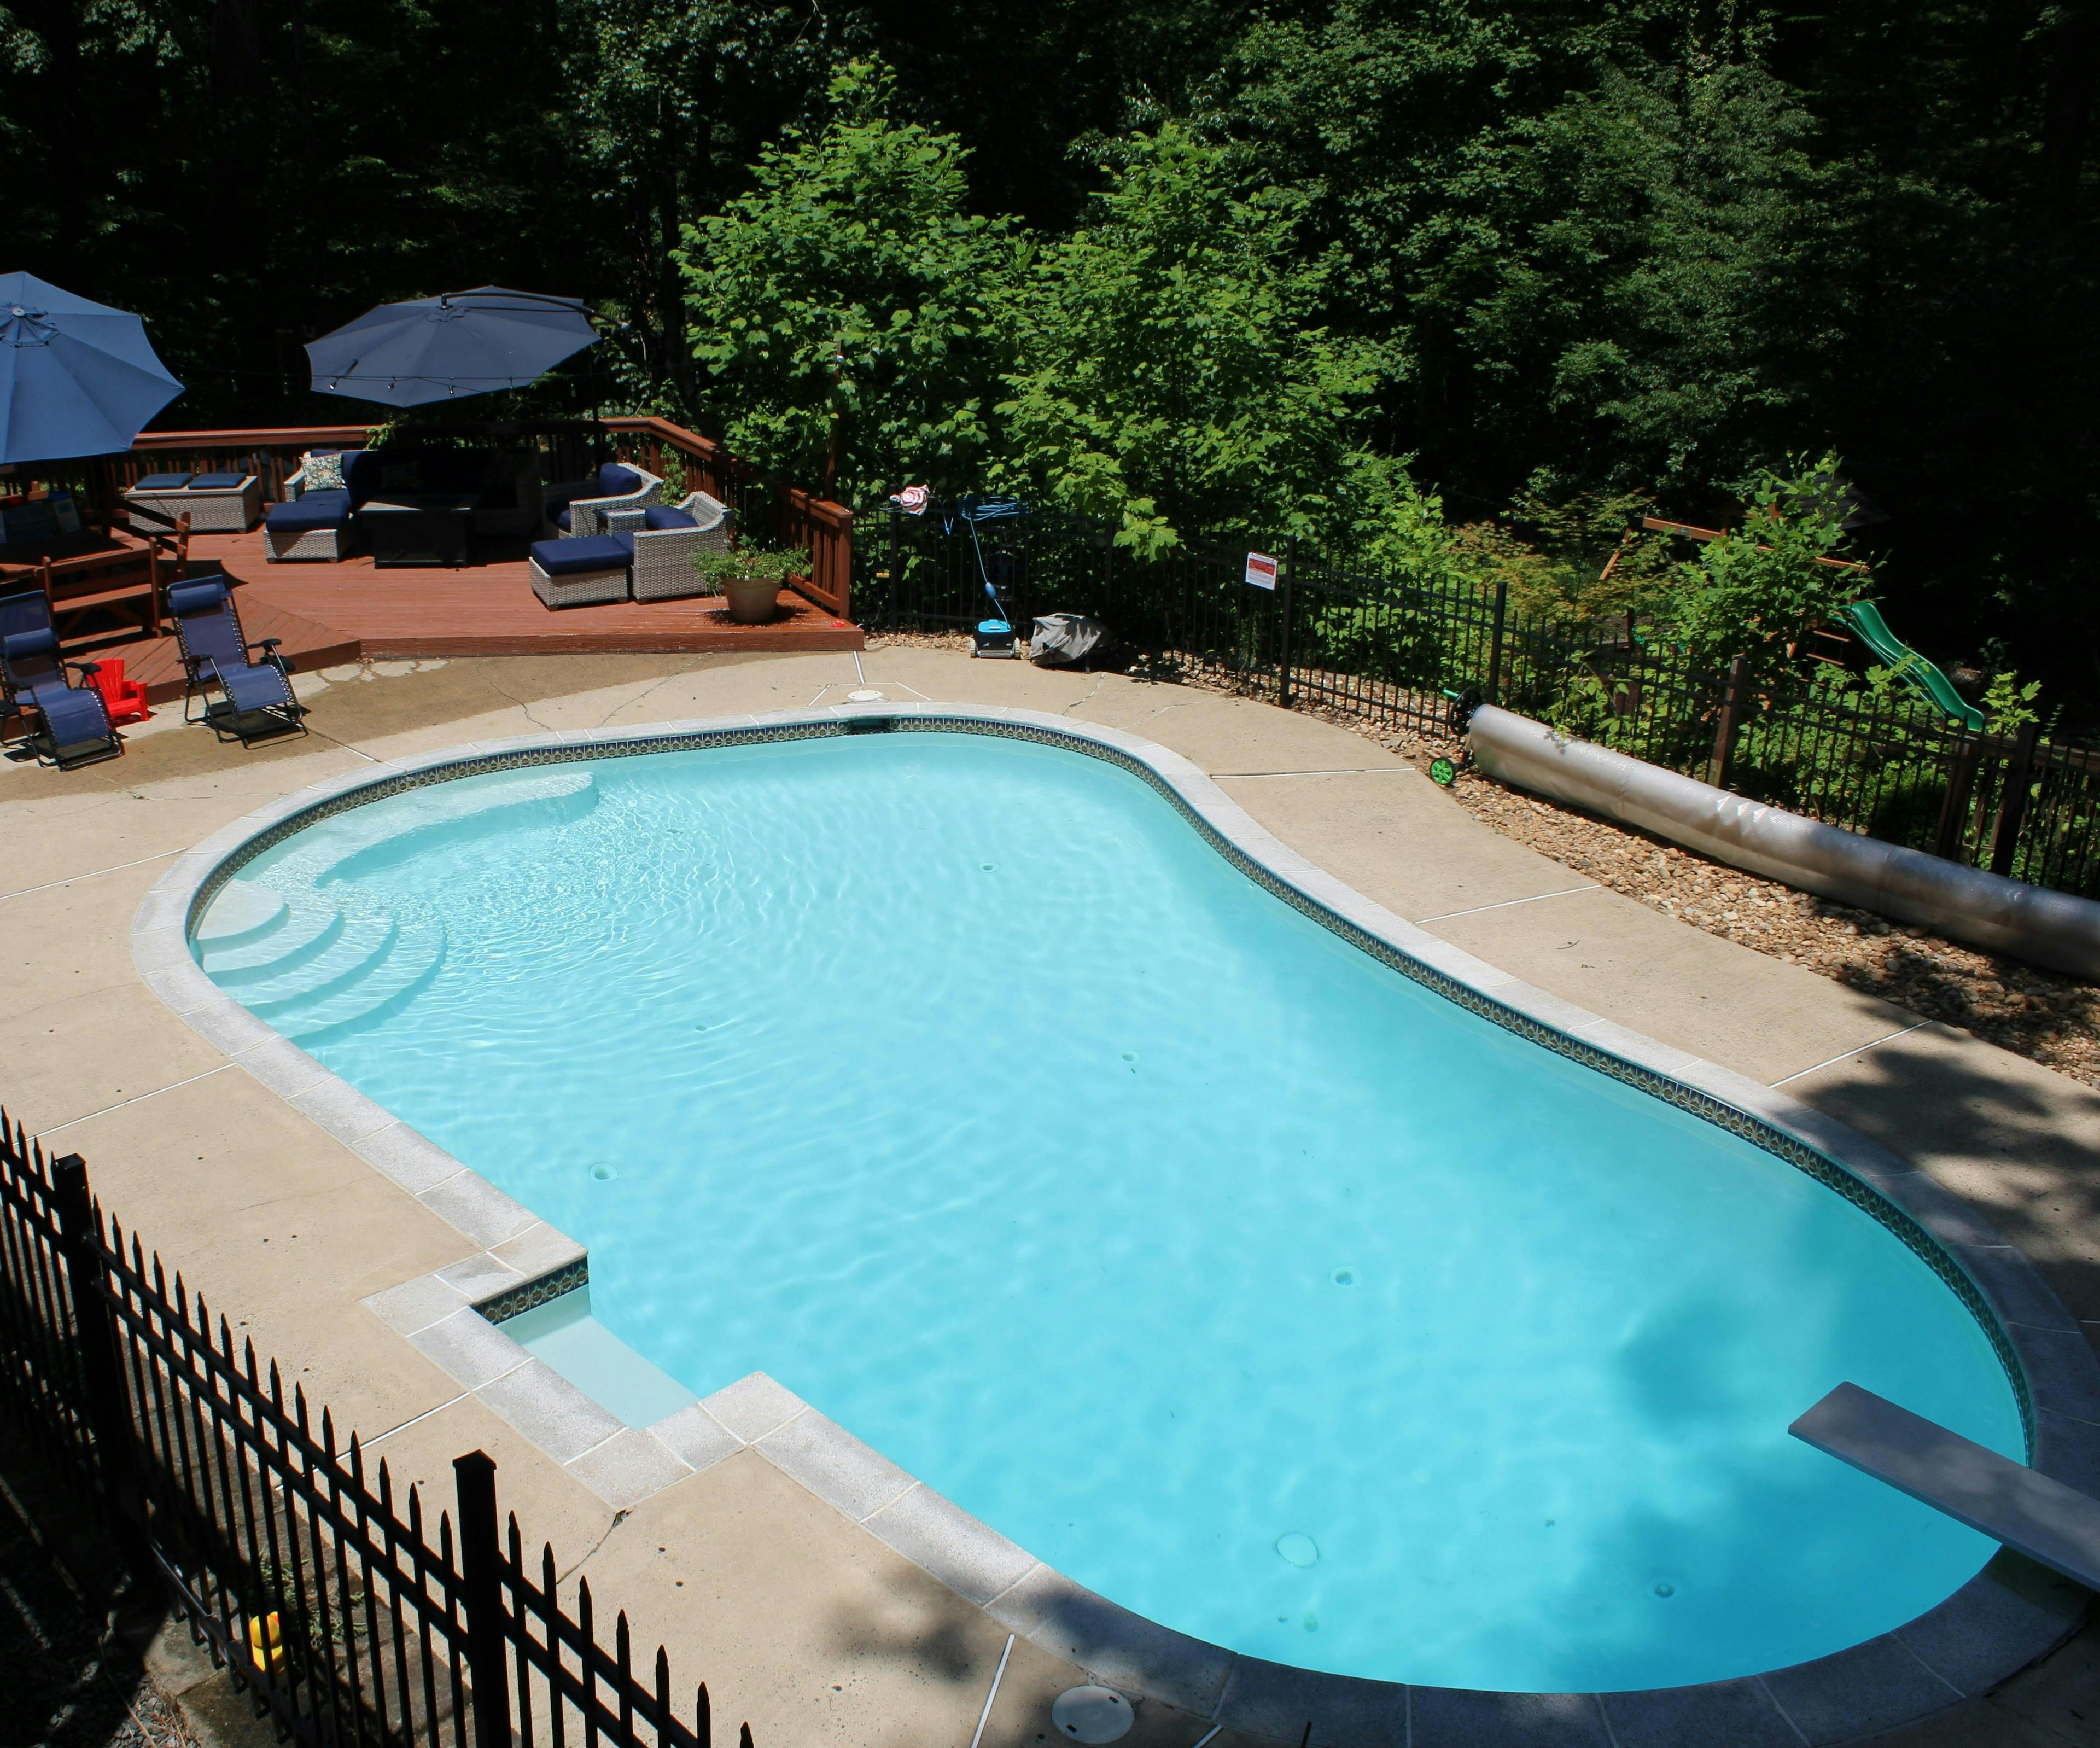 Serene, Private Pool In The Woods. -- Dog Friendly, Playground, Yard, Indoor Lounge Available! --